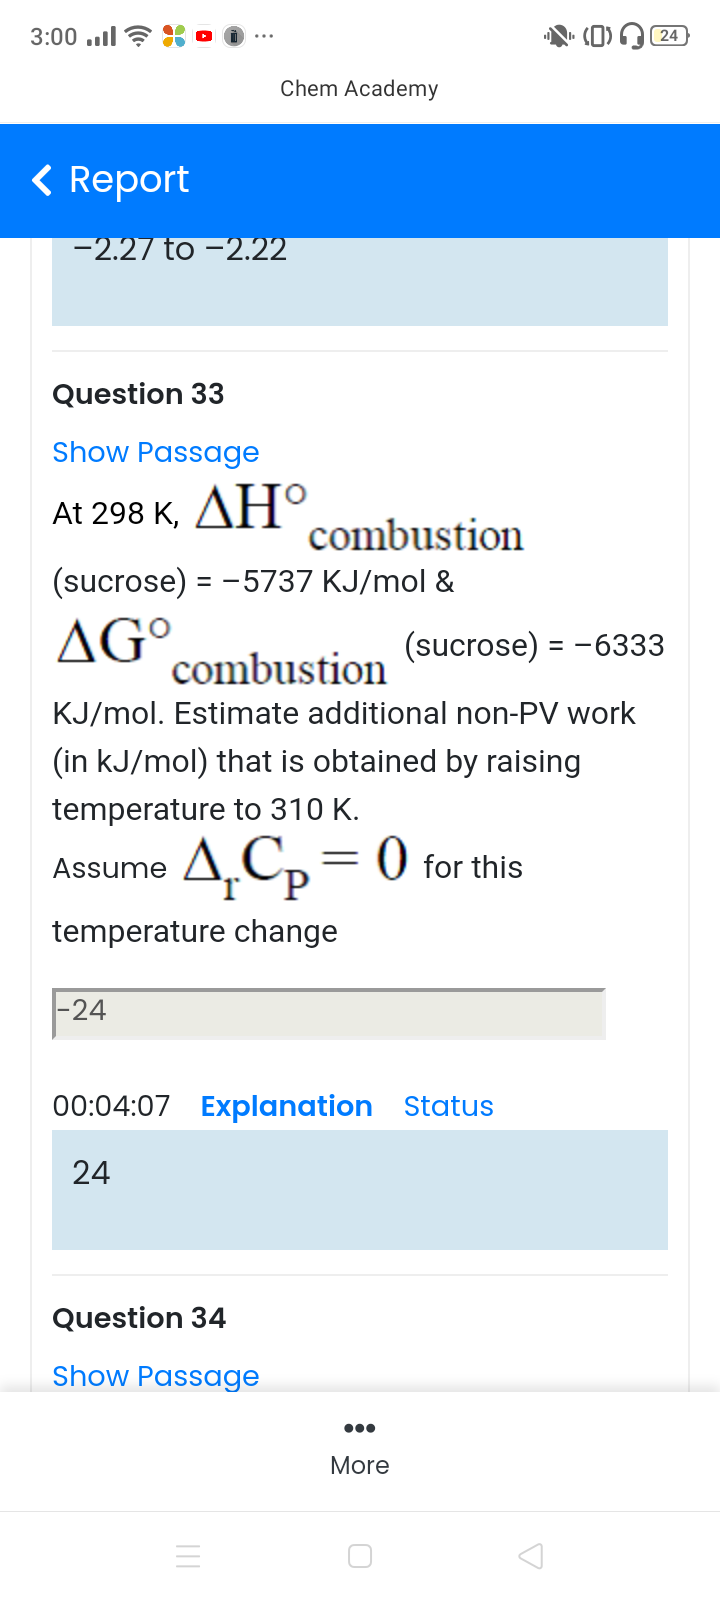 Question 33
Show Passage
At 298 K, AНО
combustion
(sucrose) = -5737 KJ/mol &
AG°.
combustion
(sucrose) = -63
KJ/mol. Estimate additional non-PV work
(in kJ/mol) that is obtained by raising
temperature to 310 K.
Assume A,Cp
4,Cp= 0 for this
temperature change
-24
00:04:07 Explanation Status
24
